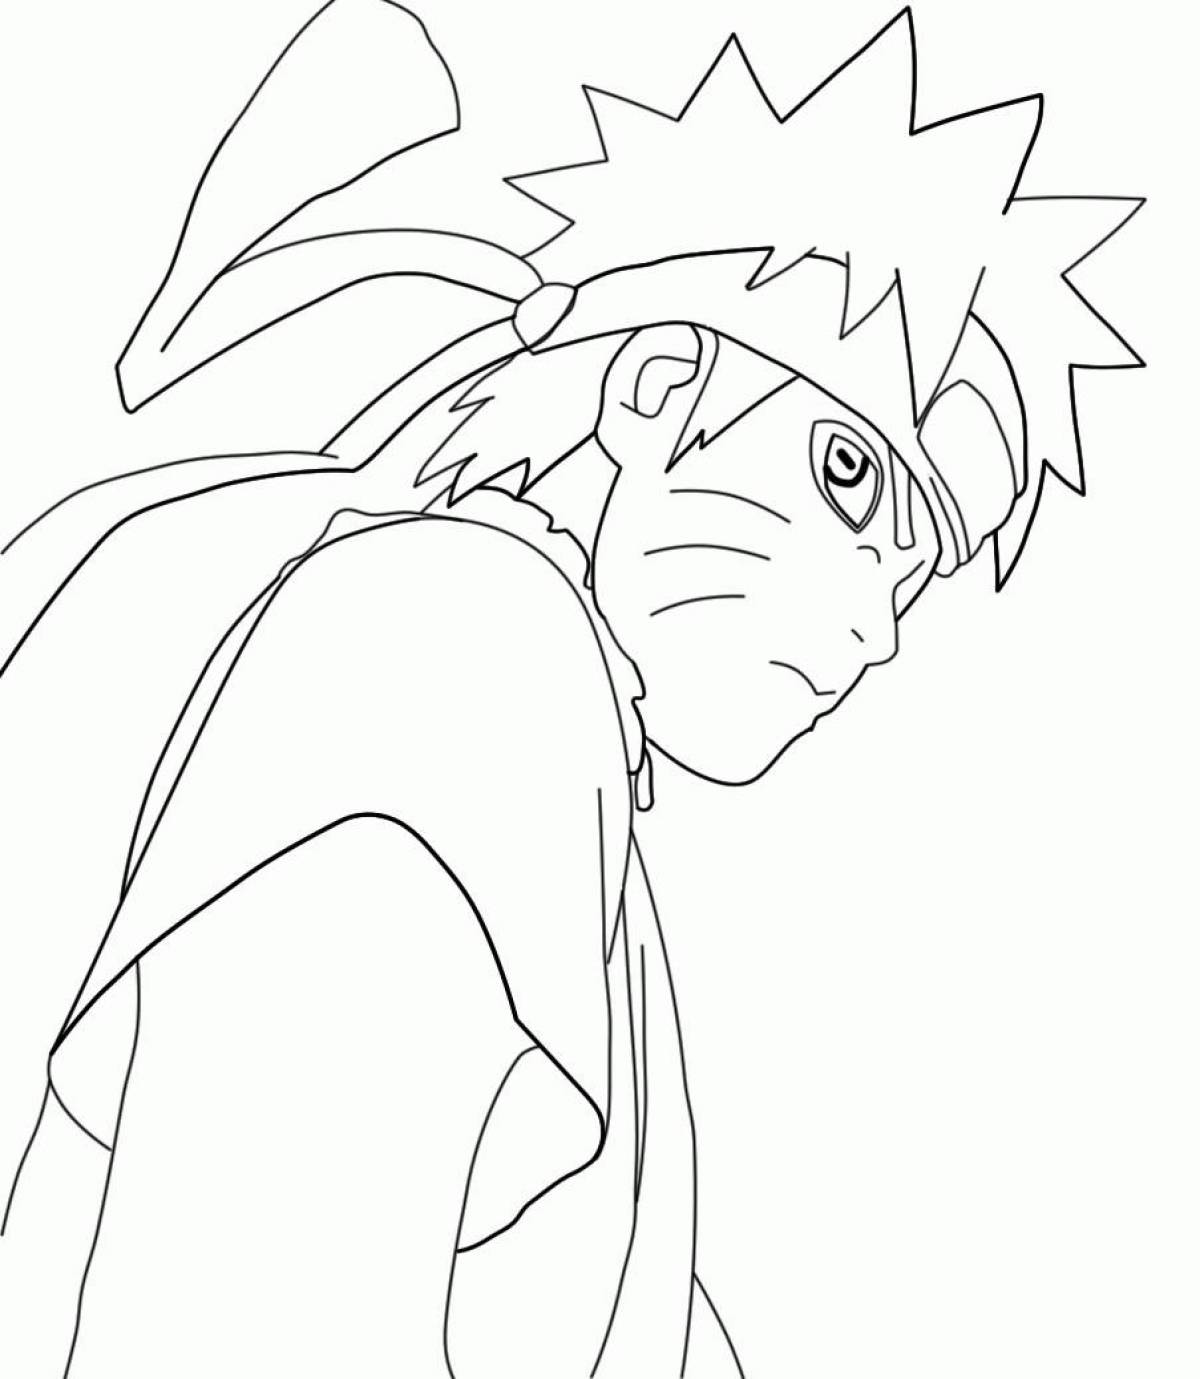 Fancy naruto coloring book for kids